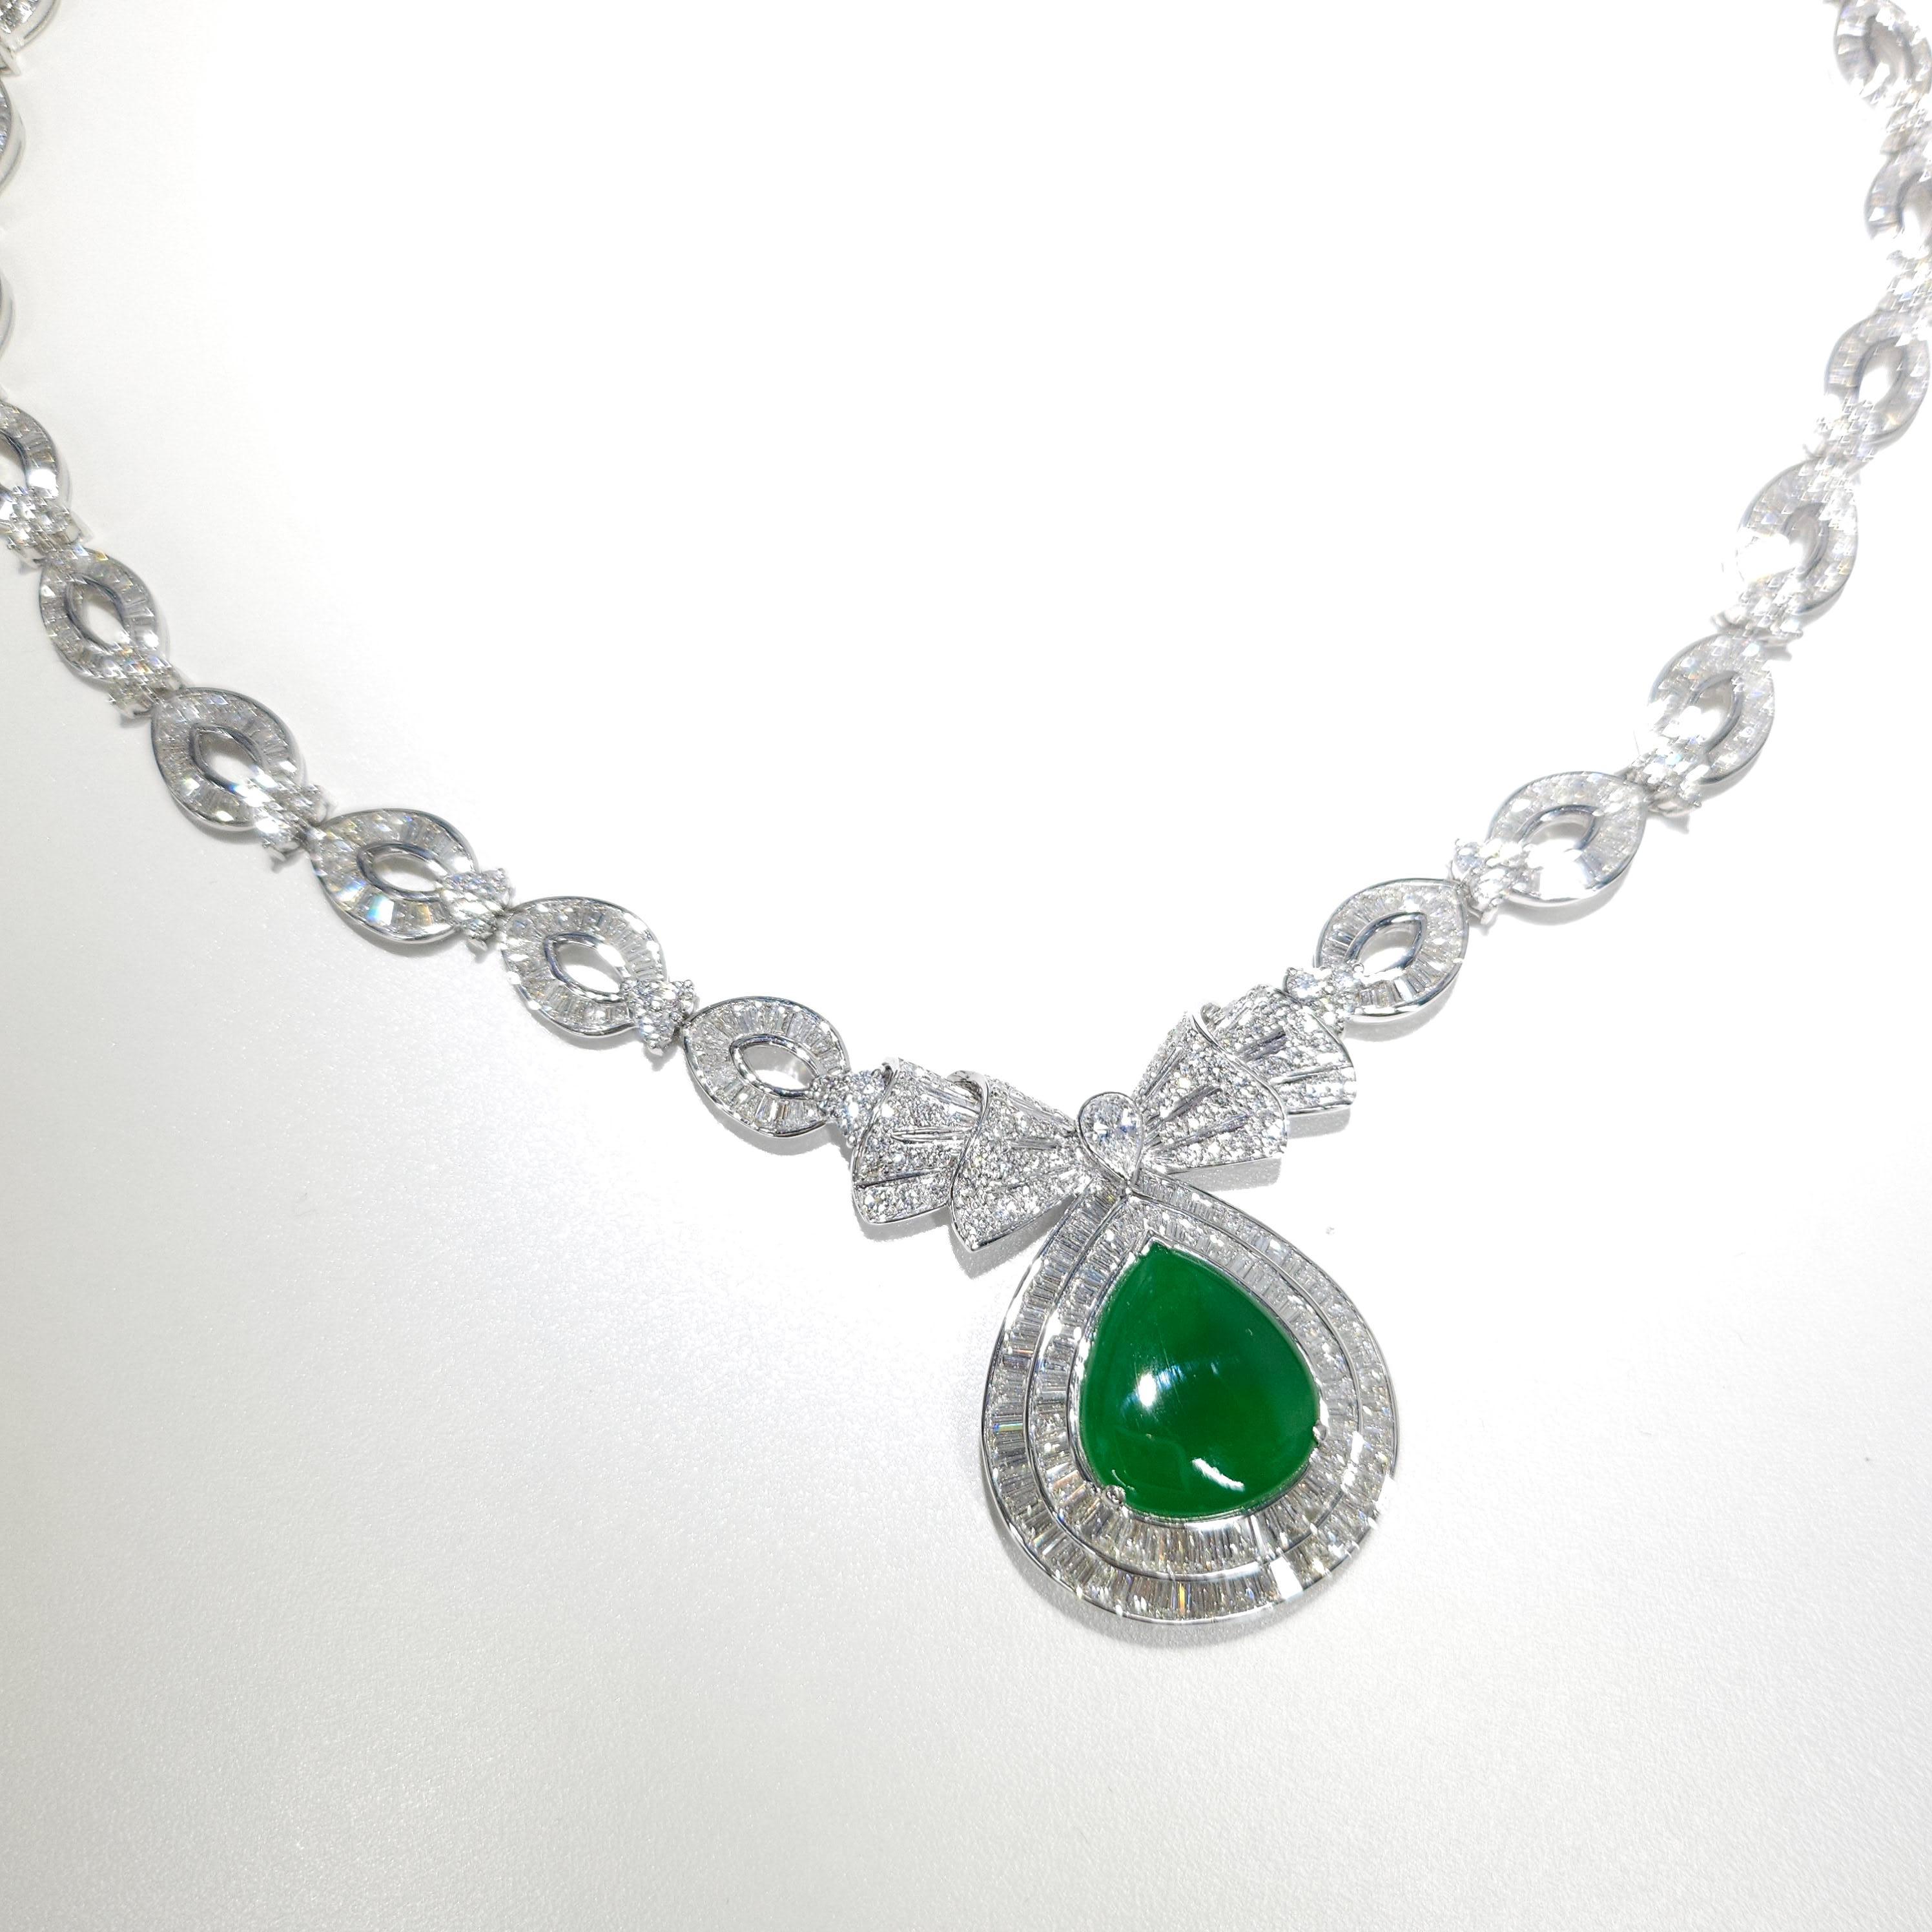 Certified Untreated Jadite Jade and 18Ct Diamond Necklace Brooch 18K White Gold For Sale 4